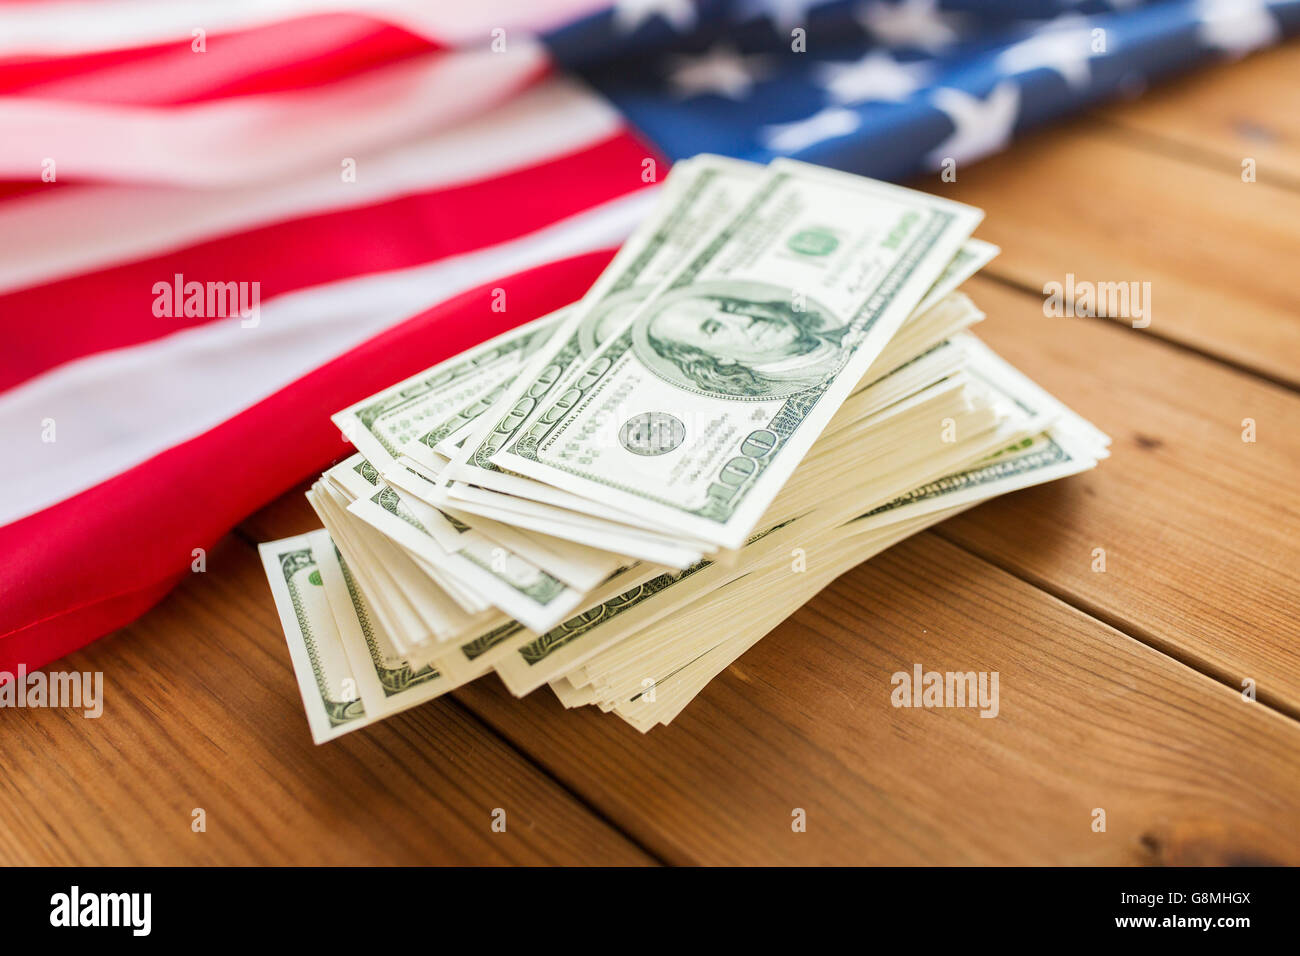 close up of american flag and dollar cash money Stock Photo